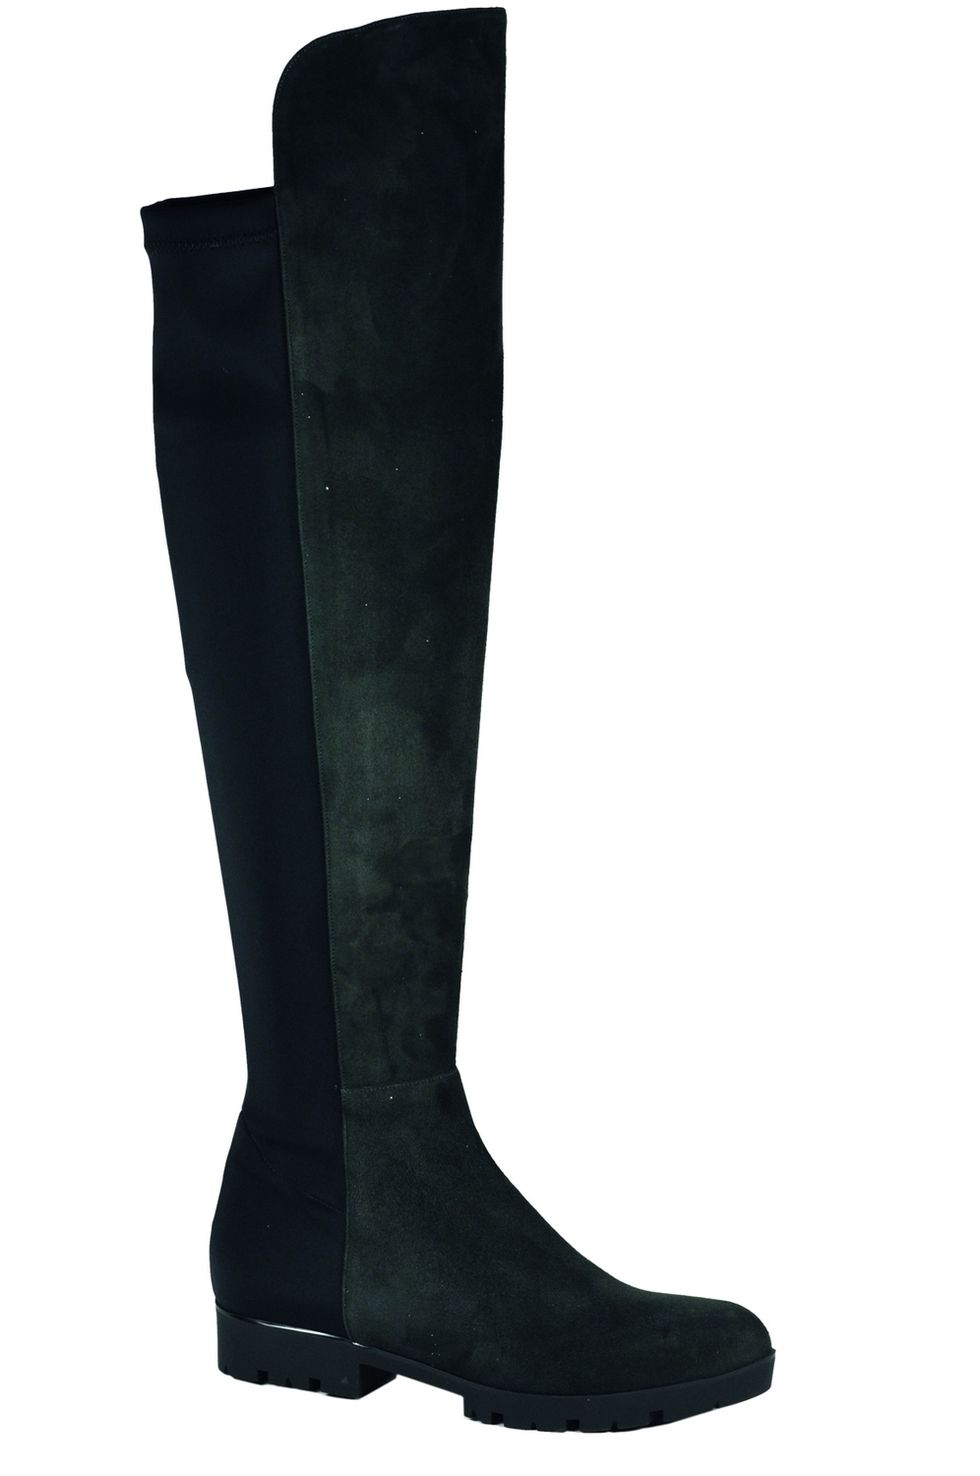 Boot, Costume accessory, Knee-high boot, Riding boot, Synthetic rubber, Leather, Motorcycle boot, 